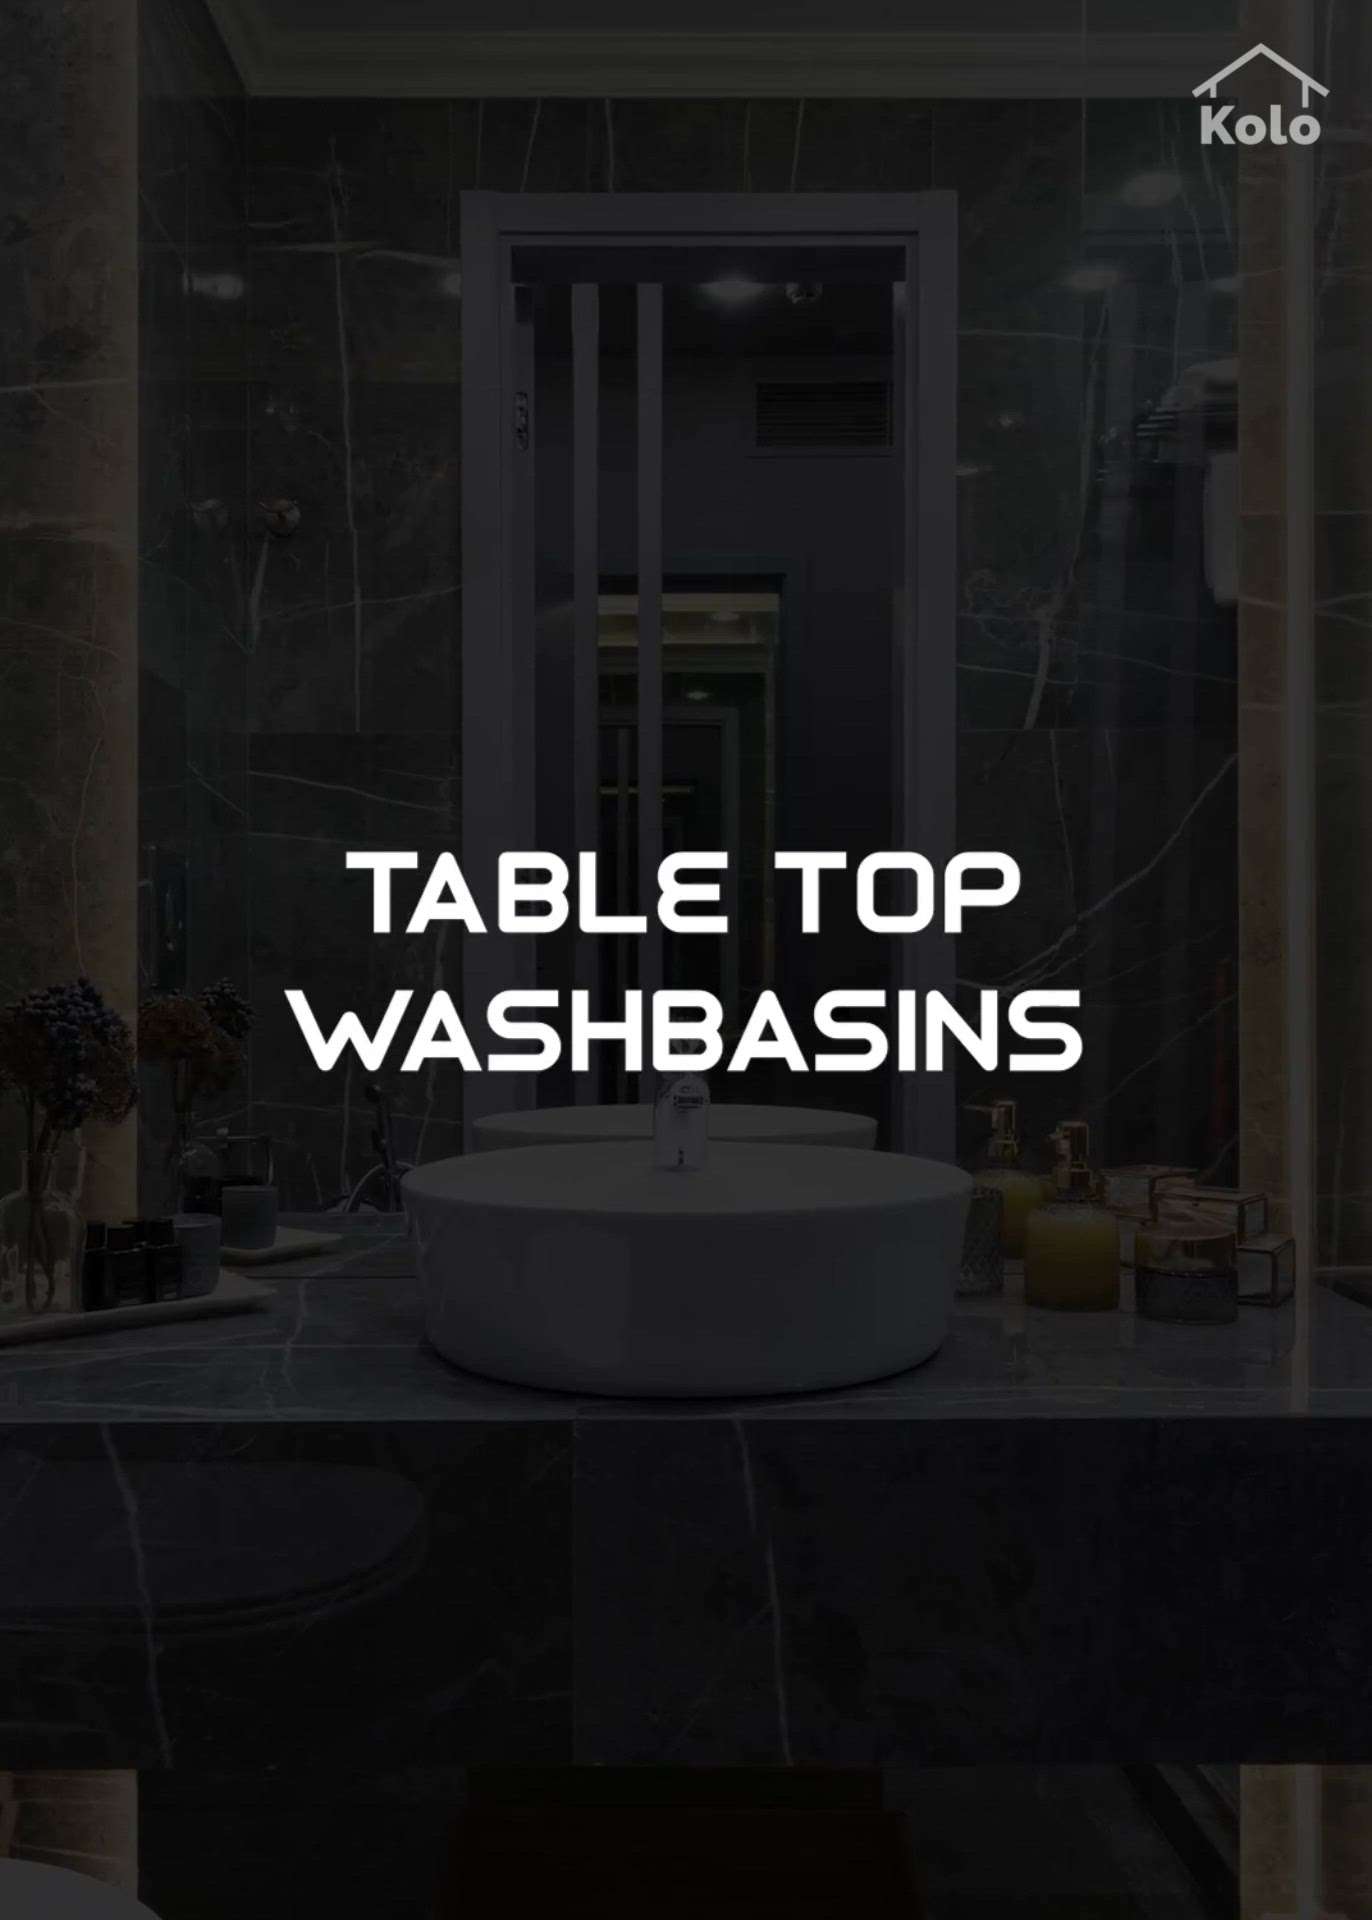 ABC My Home
Table top washbasins for your homes @ ABC My Homes 

#FlooringTiles #BathroomTIles #KitchenTiles #tabletopwashbasin #BathroomTIlesdesign #sanitarywares #sanitary #sanitaries #abc #abcmyhome #abcmyhomekochi #abcmyhomealappuzha